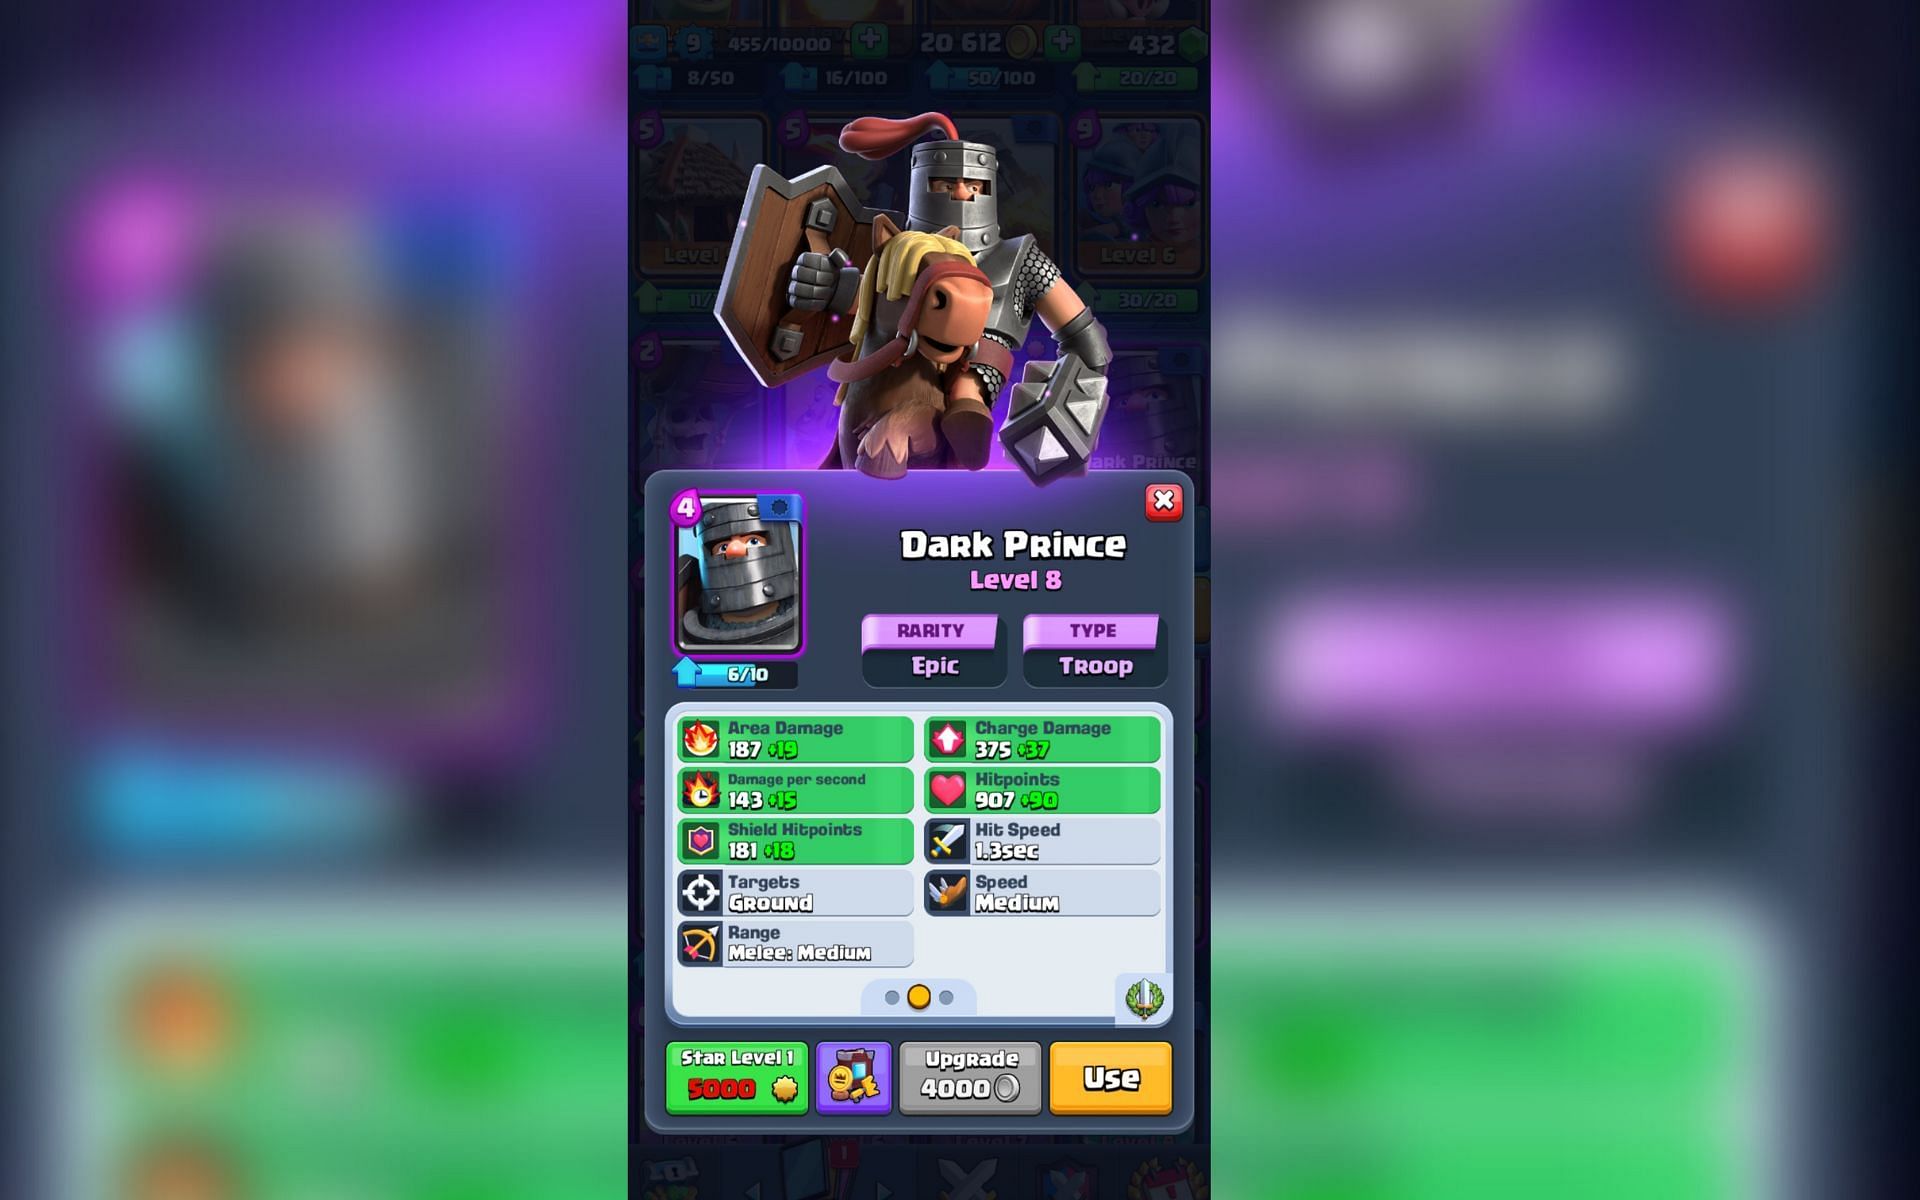 Top Ladder Cards for Legendary Arena (August Update) - Clash Royale